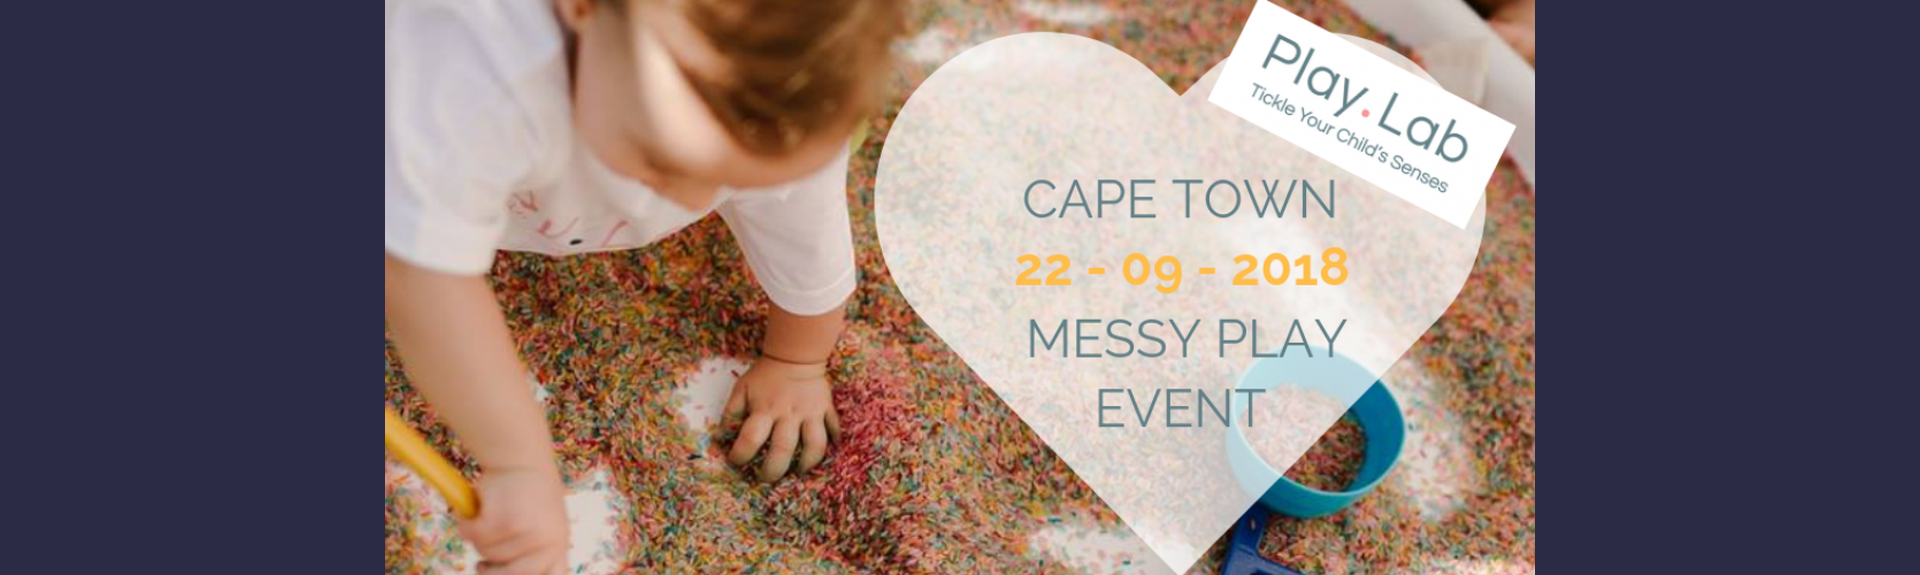 Cape Town Messy Play Date